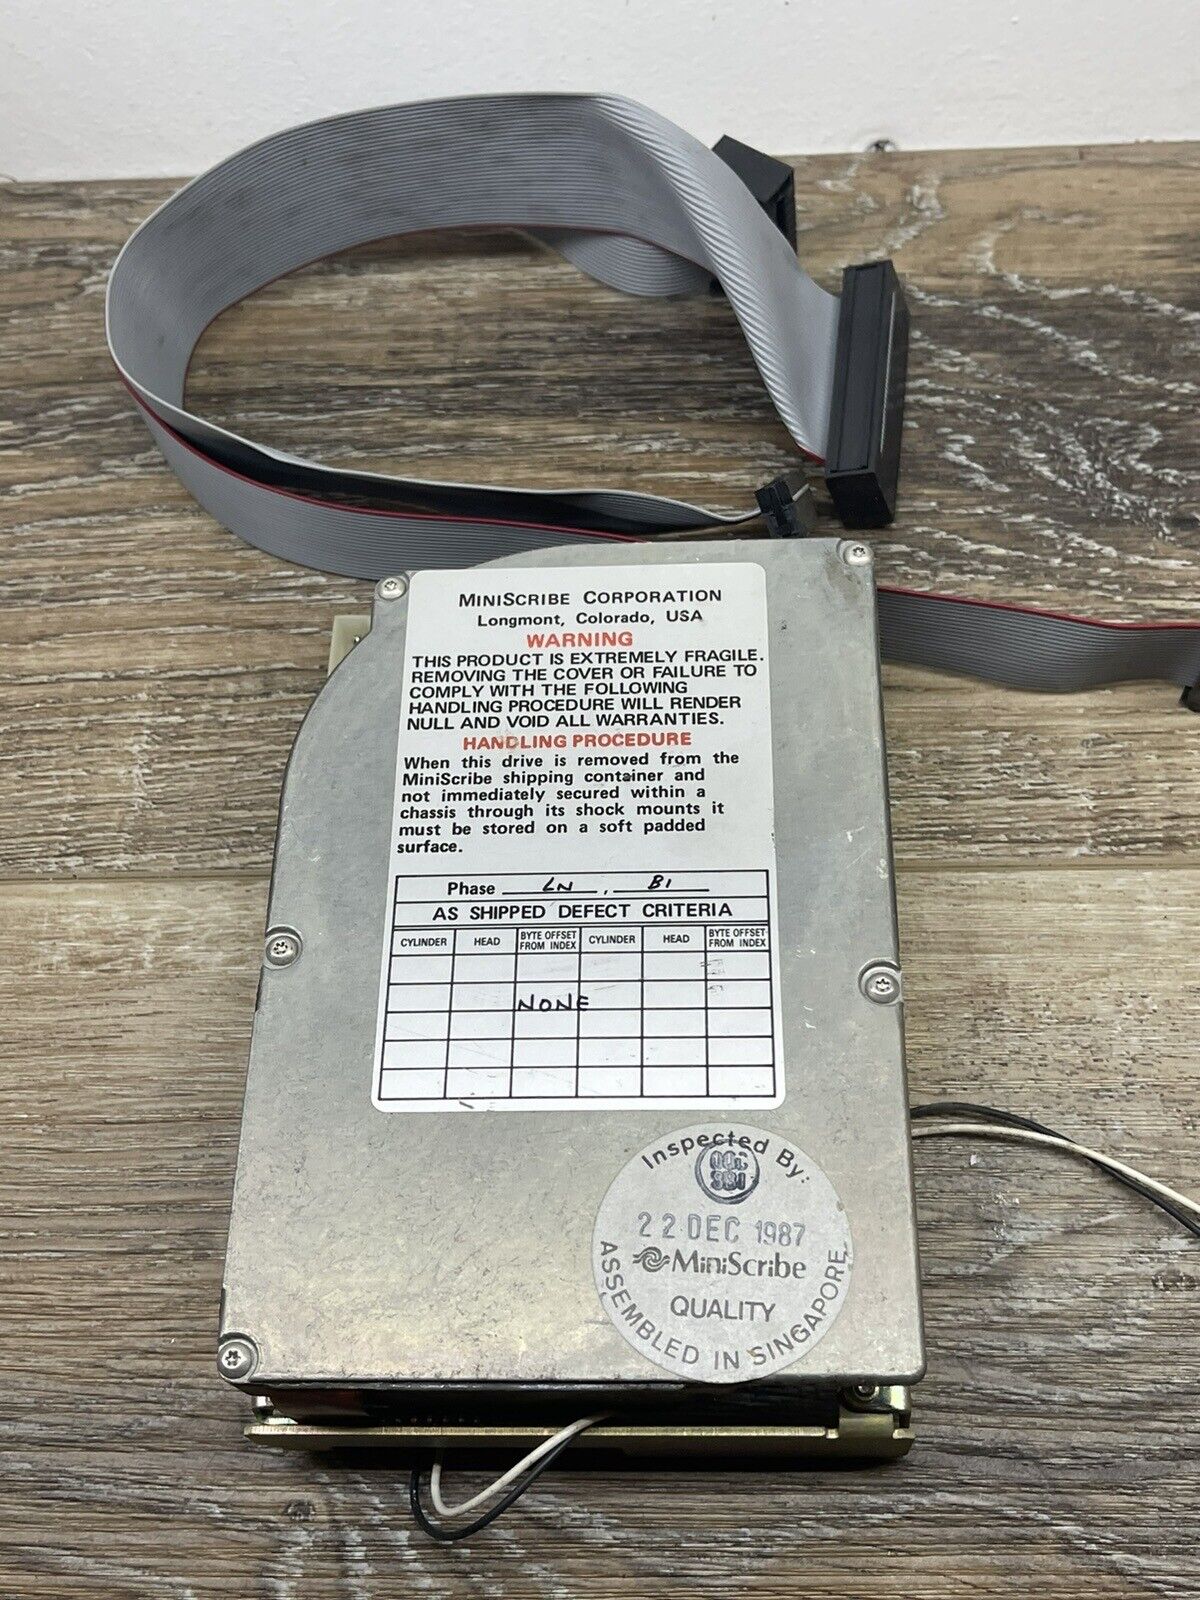 Miniscribe Model 8438 rare old 3.5 PC Hard Drive - Vintage With Cords